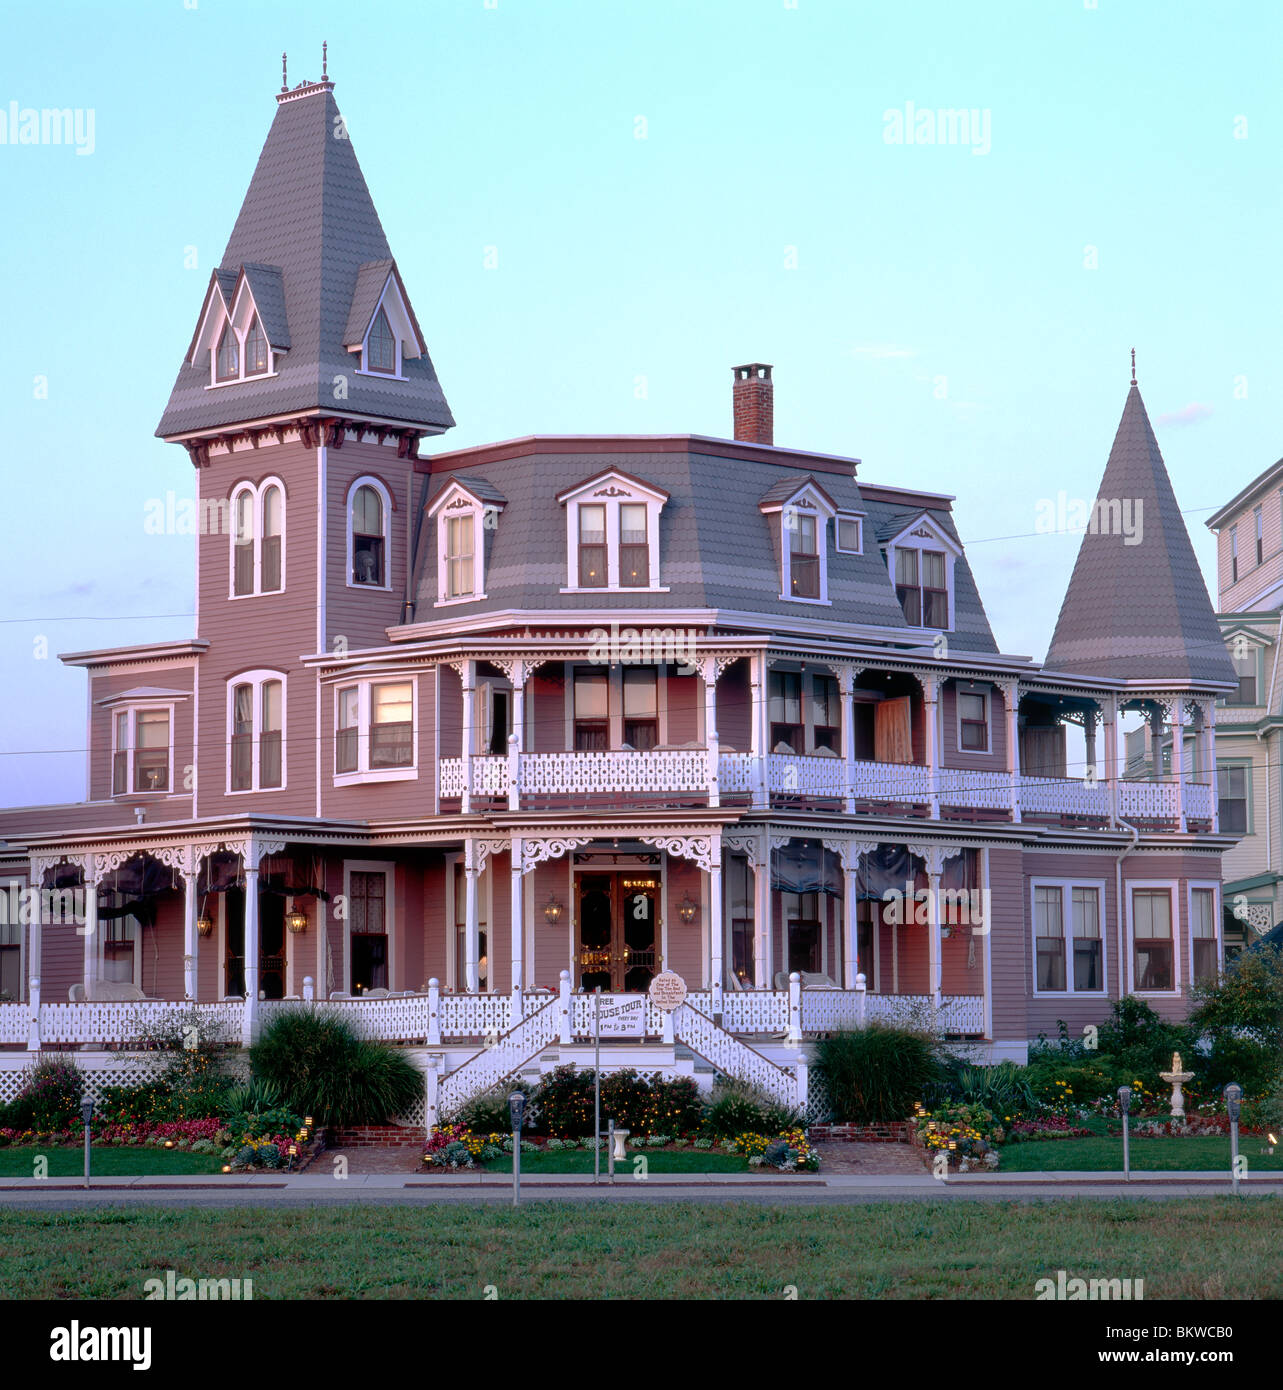 Angel of the Sea (c1850), bed & breakfast, Victorian architecture style in the seaside resort town of Cape May, New Jersey, USA Stock Photo